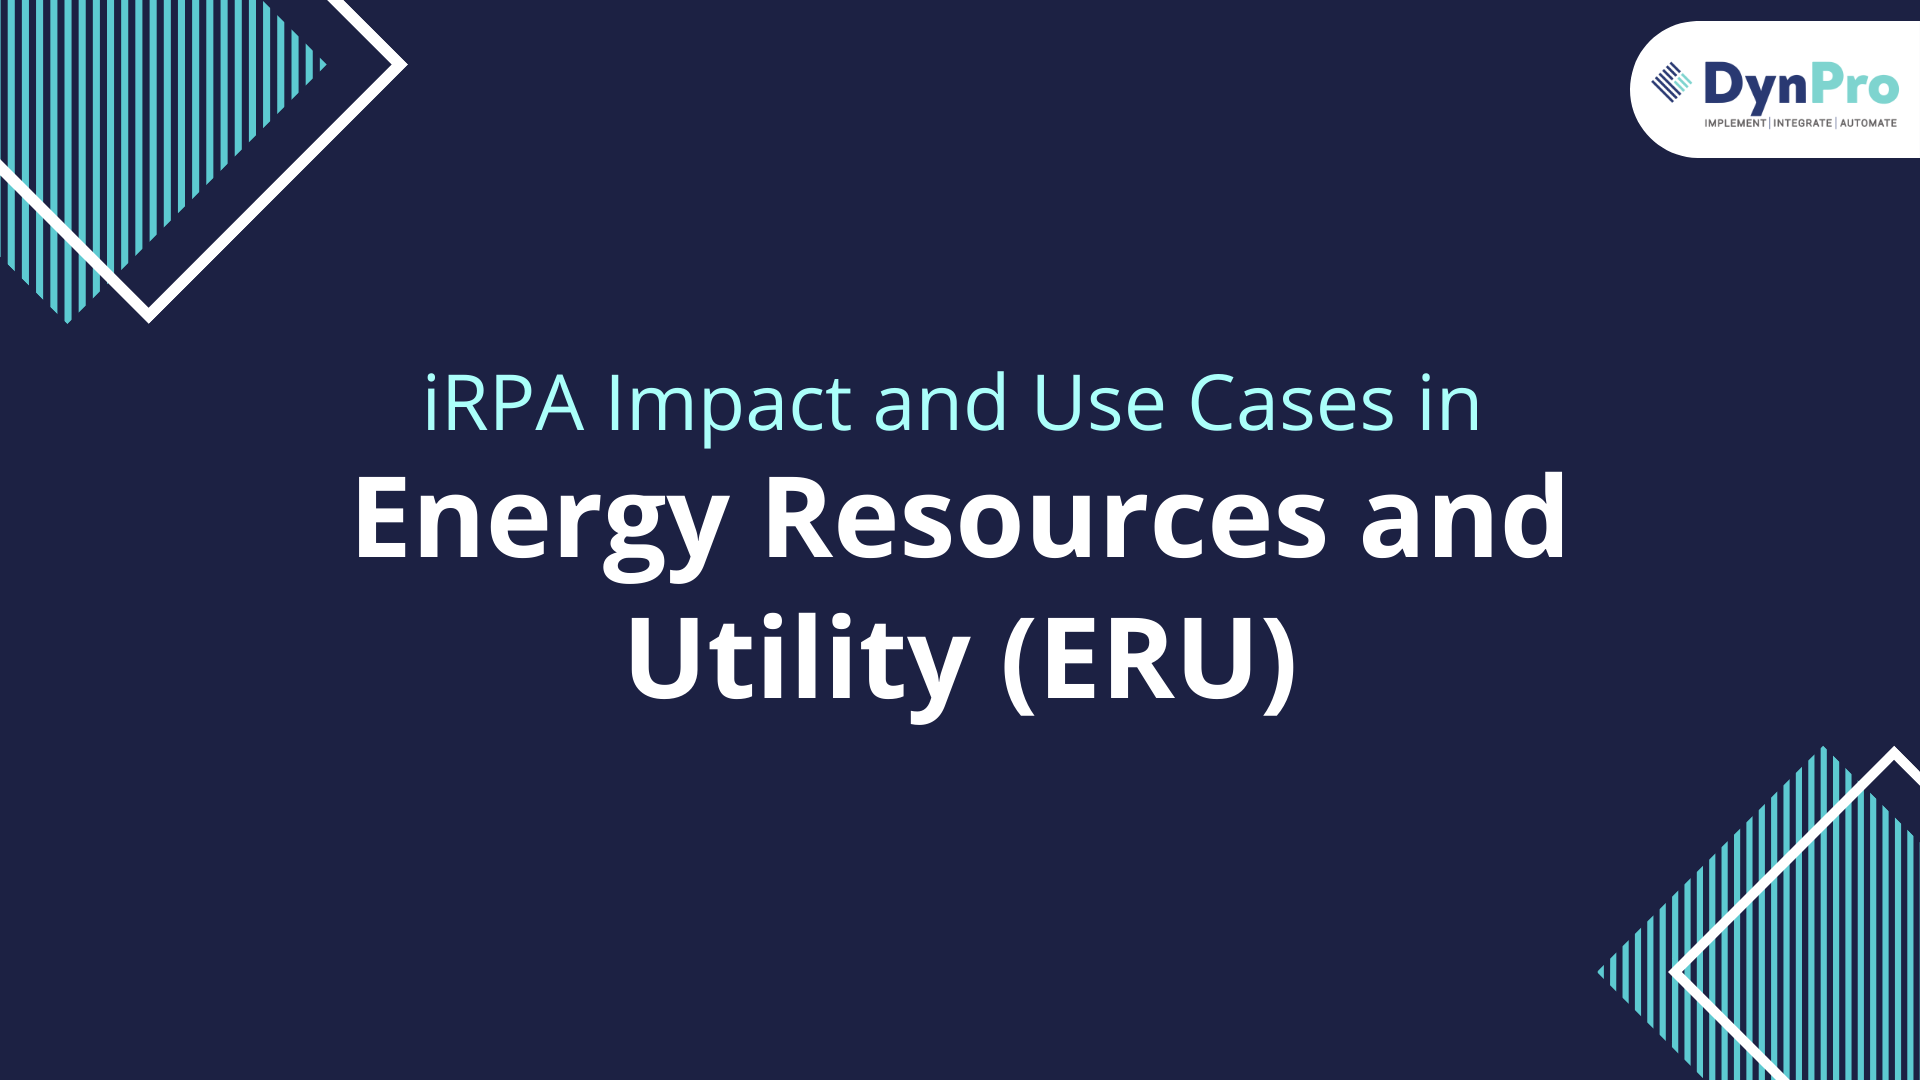 iRPA Impact and Use Cases in Energy Resources and Utility (ERU)